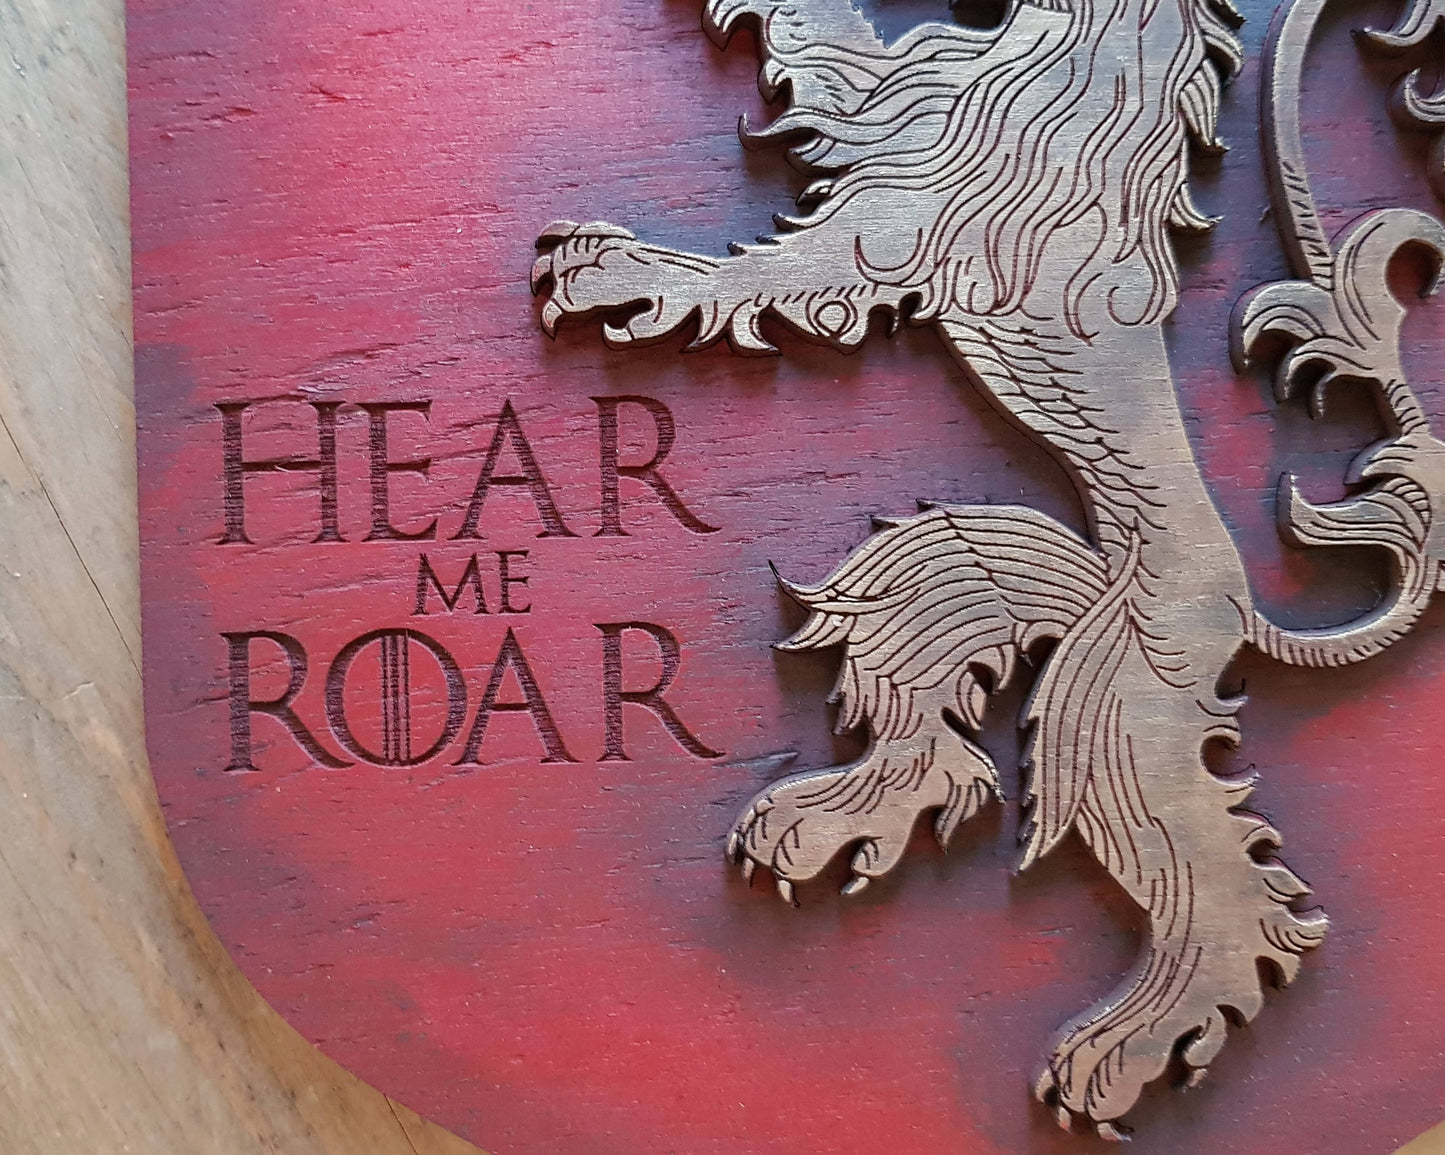 Lannister House, Banner wood sign of Game of Thrones.